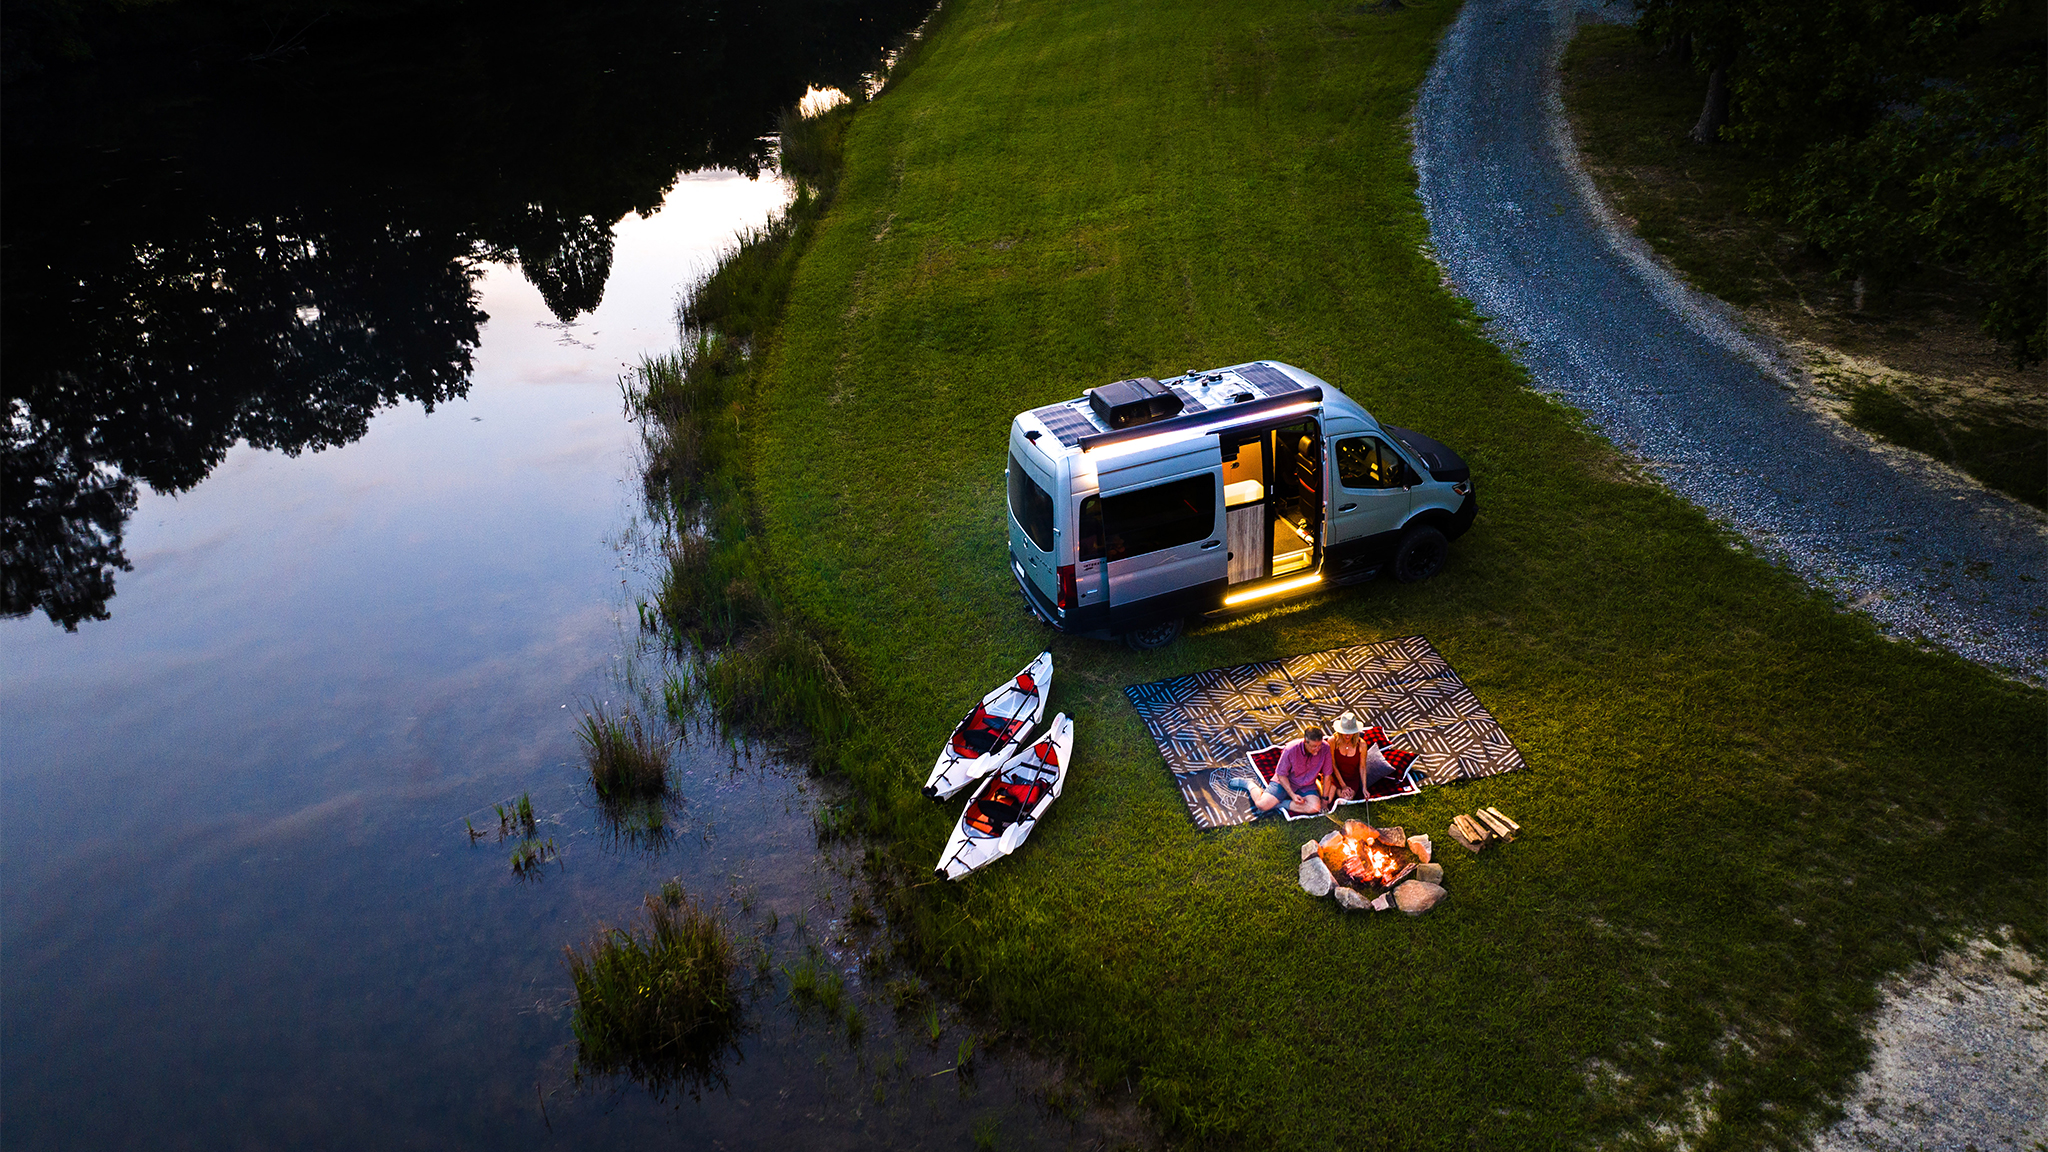 An ariel shot of the Airstream 19X Touring Coach parked next to a lake with a couple sitting by a campfire at night.